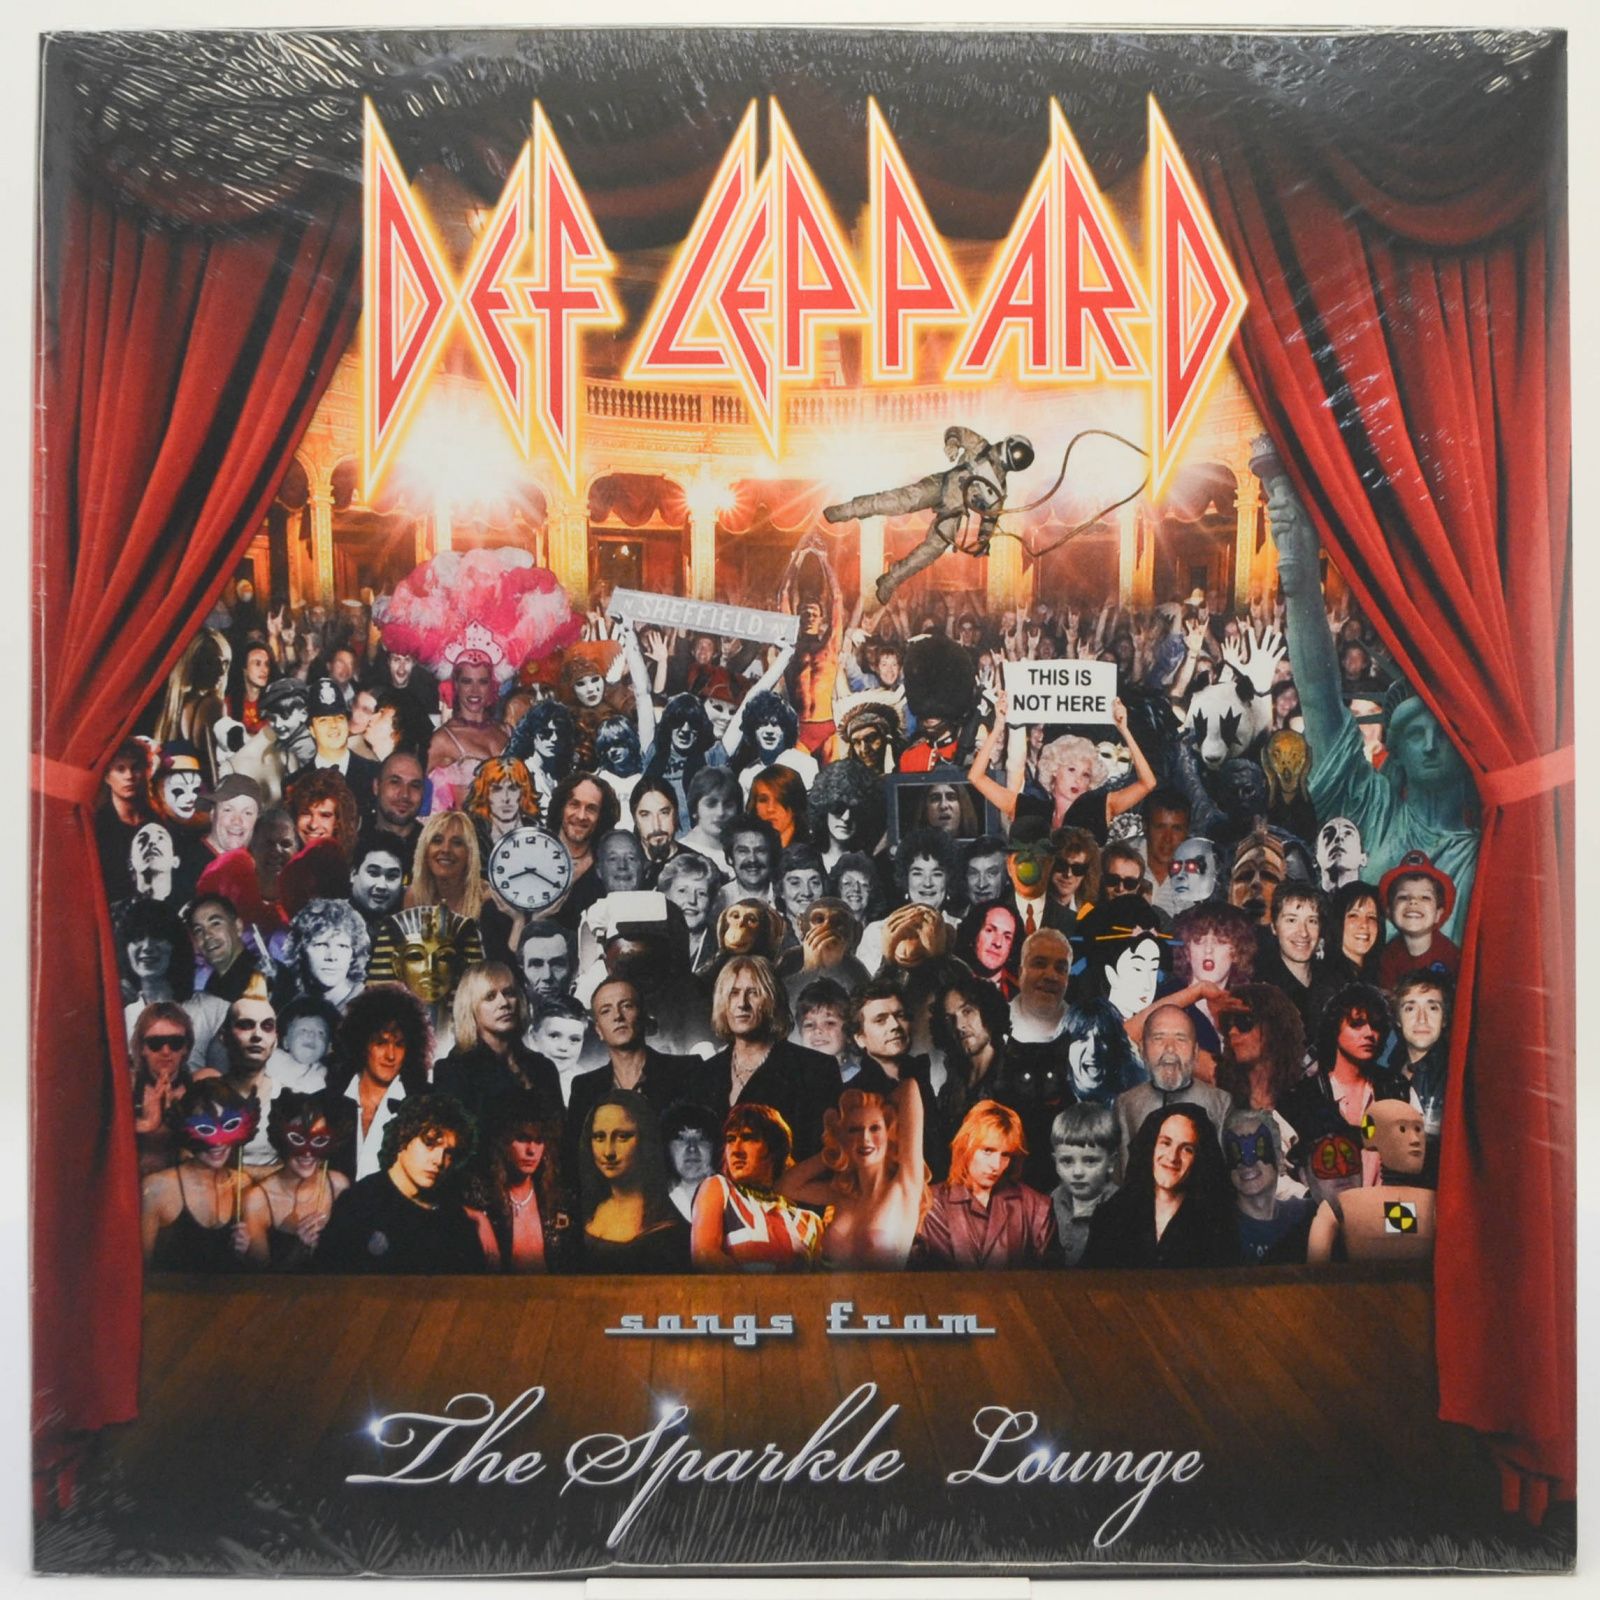 Def Leppard — Songs From The Sparkle Lounge, 2008